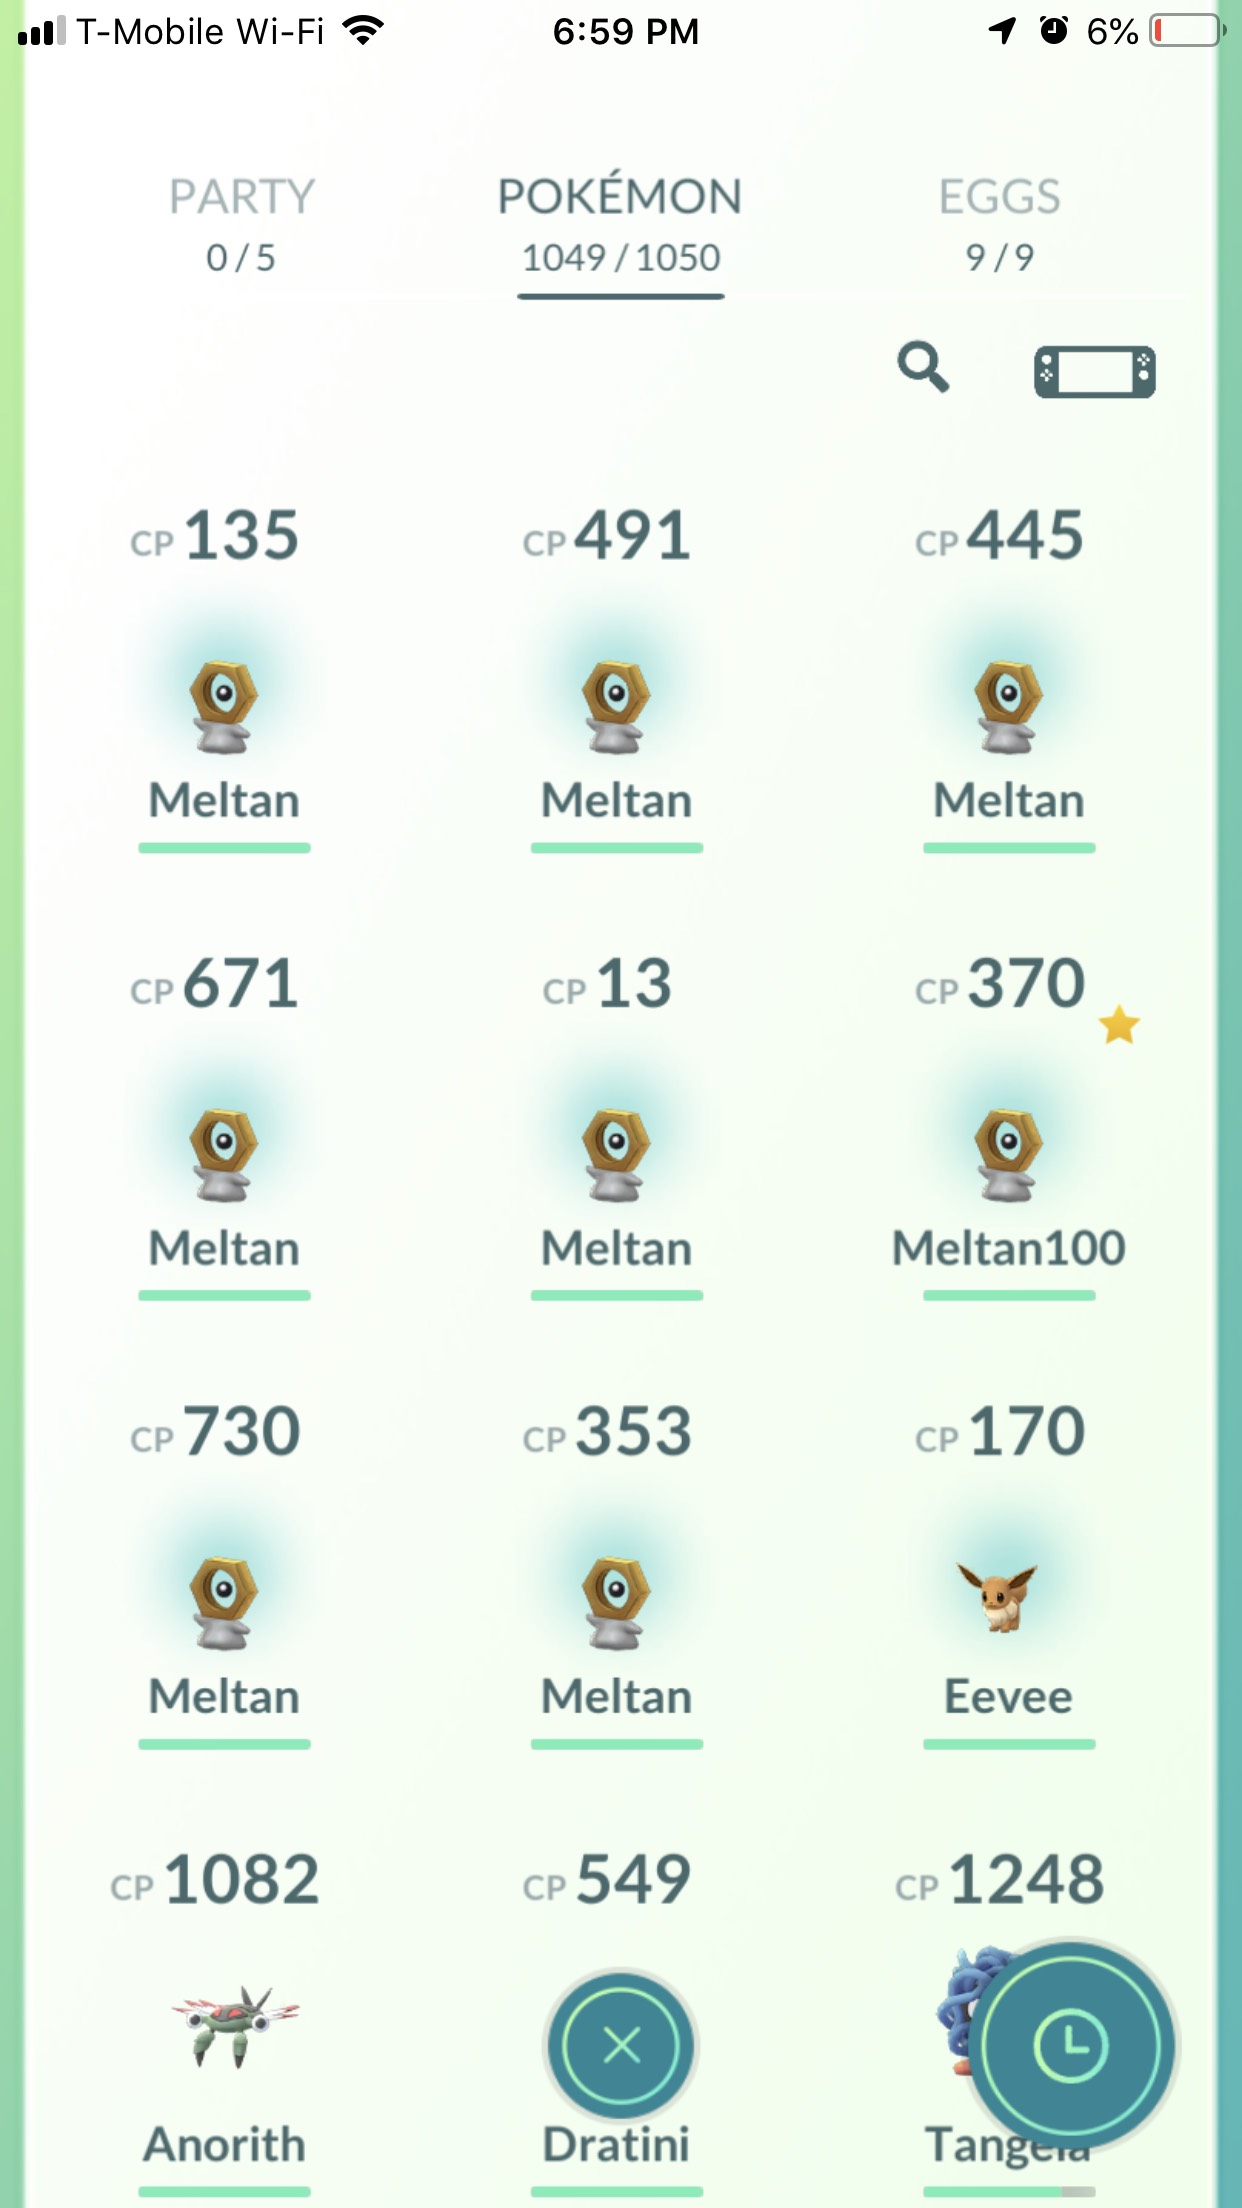 Guide How To Transfer Pokemon From Pokemon Go And Obtain Meltan In Pokemon Let S Go Pikachu Eevee Nintendo Wire